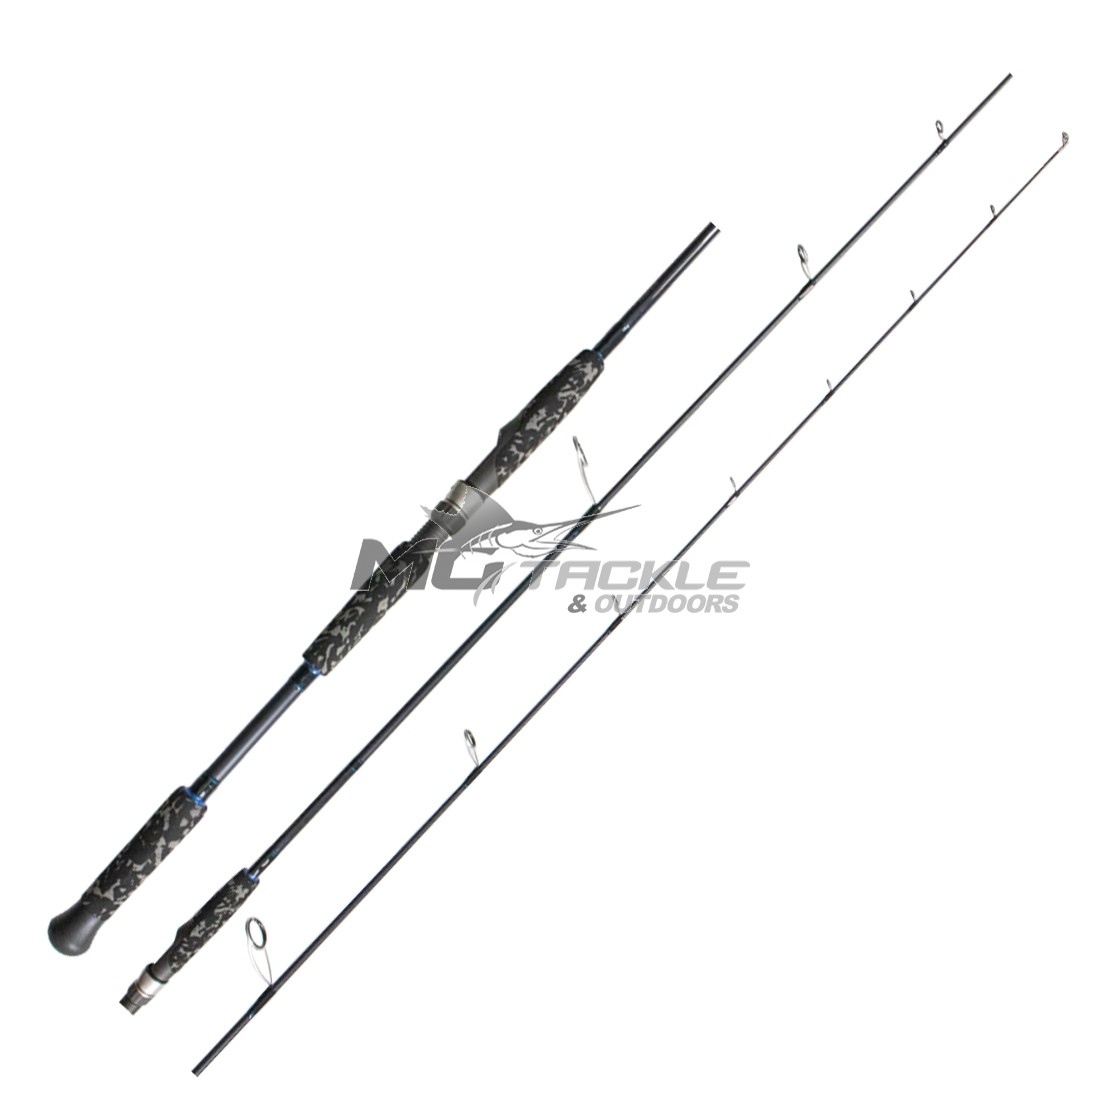 Gary Howard Game Fishing Rods - TEASER or DREDGE TOWING